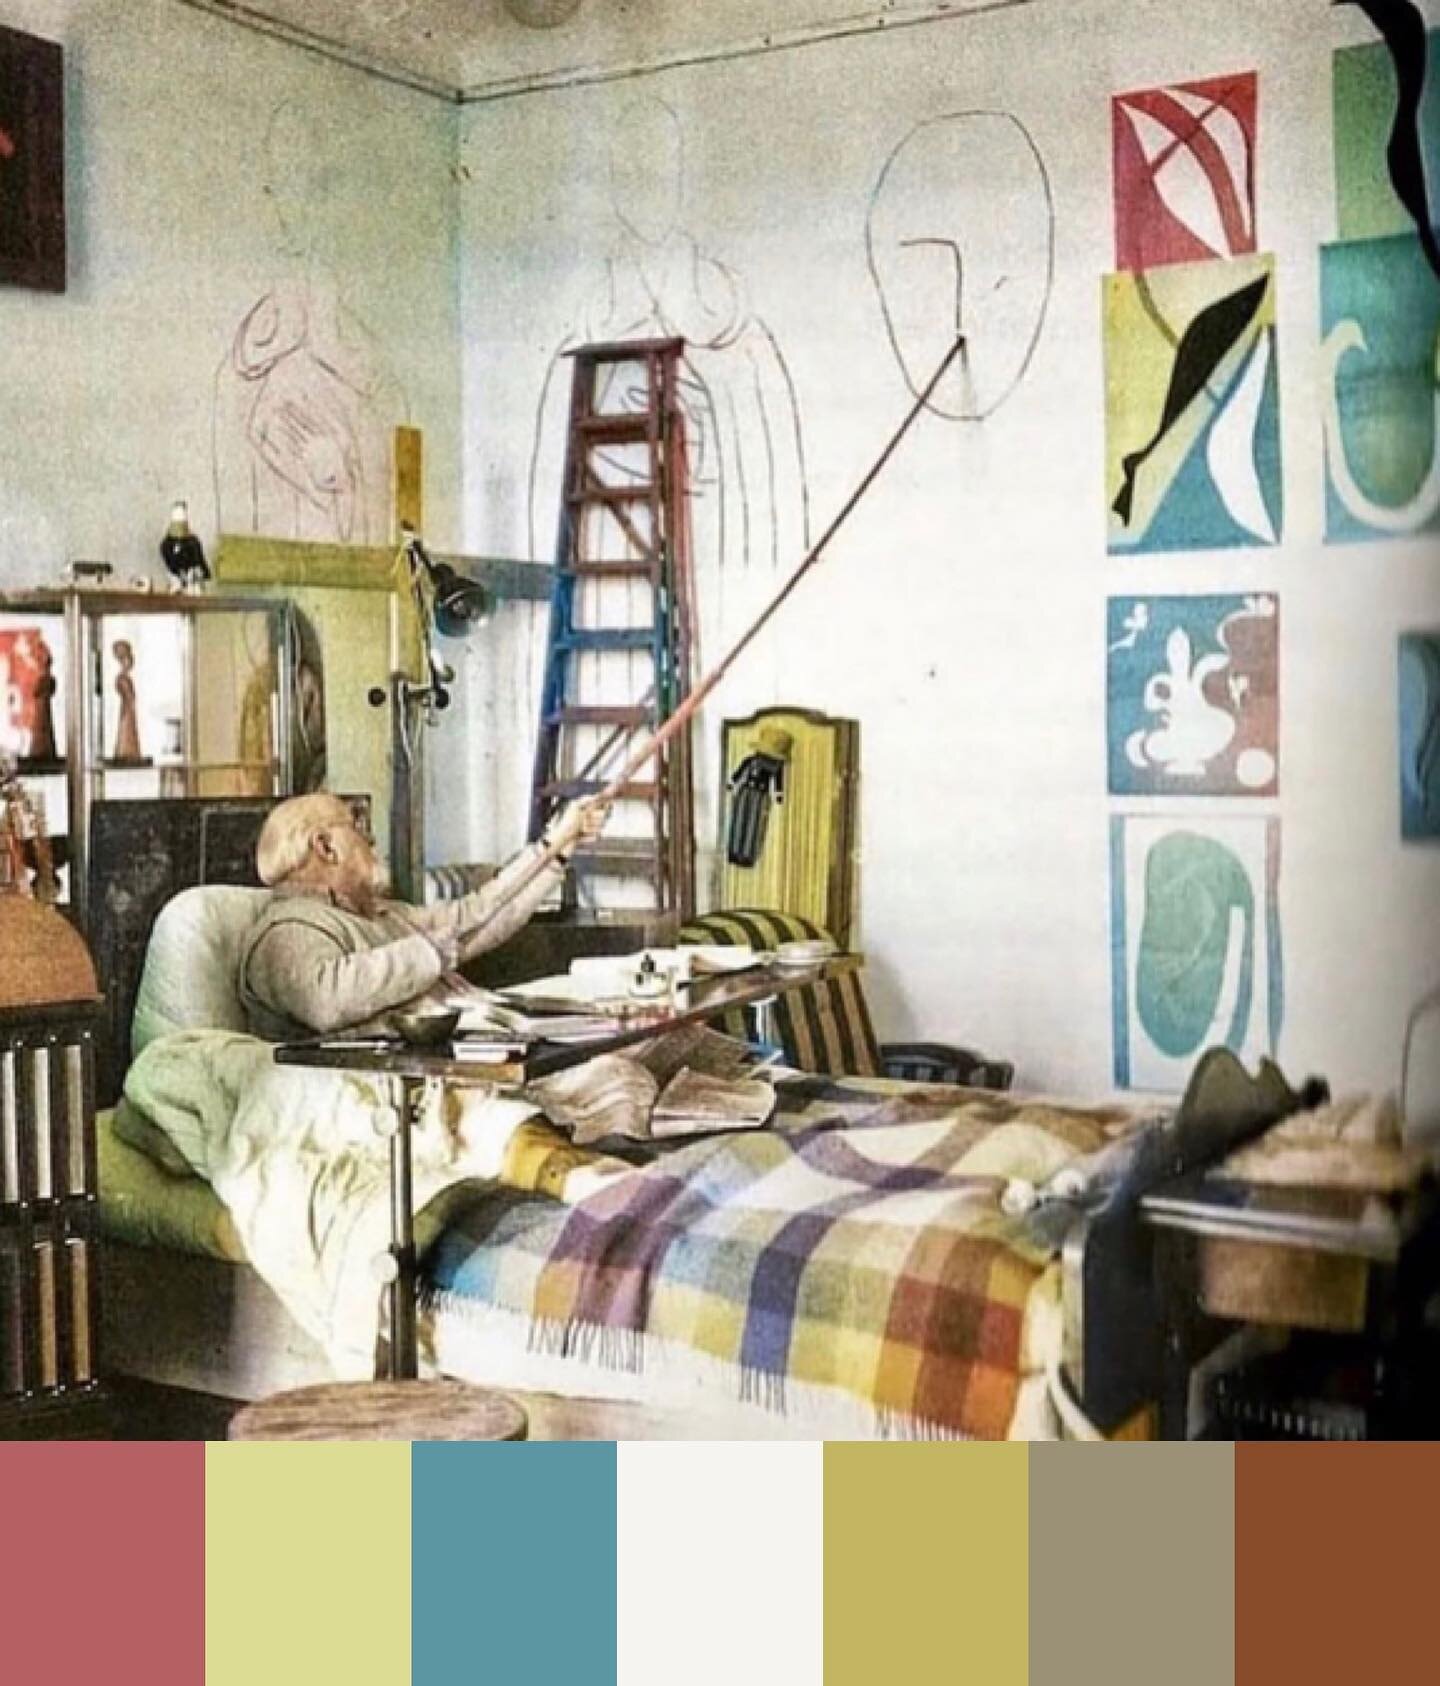 How badly do you need to do your work? Henry Matisse.
#matisse #artdirection #palette  #vintagepalette  #artistlife